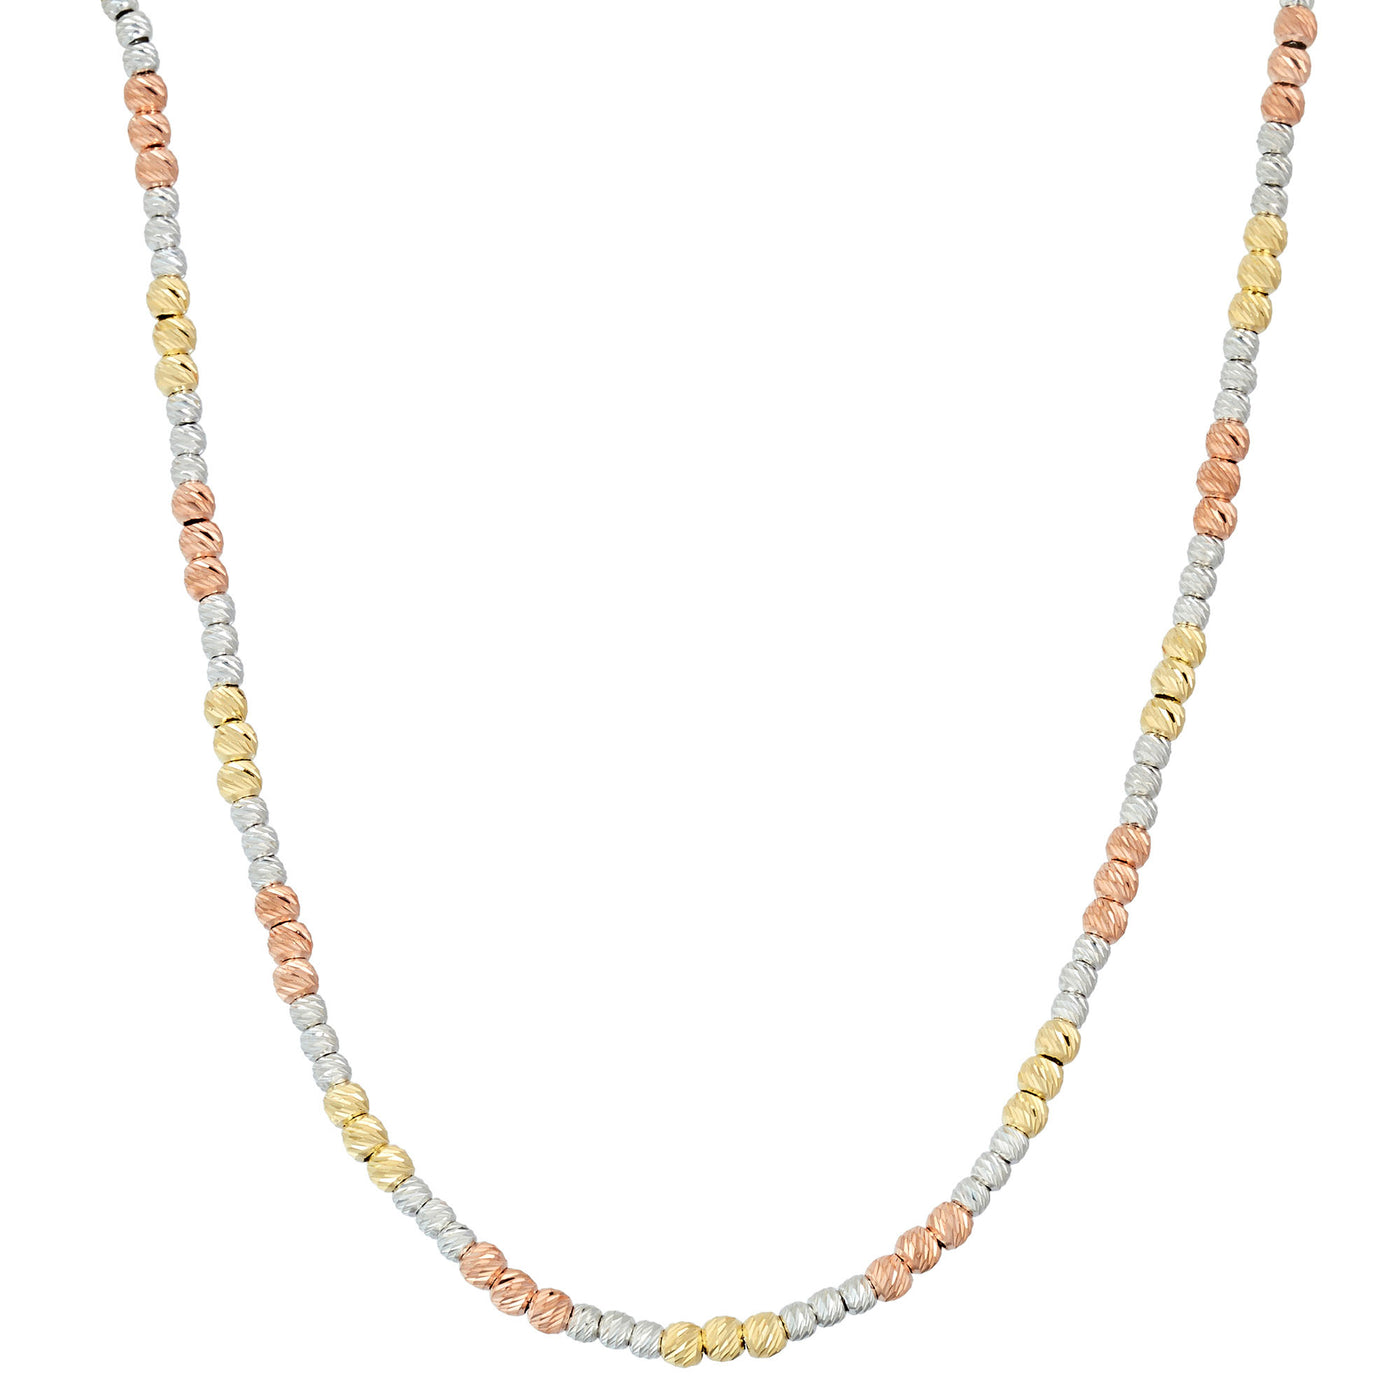 Rebecca Sloane Tri-Color Silver Station Necklace with Facet Beads